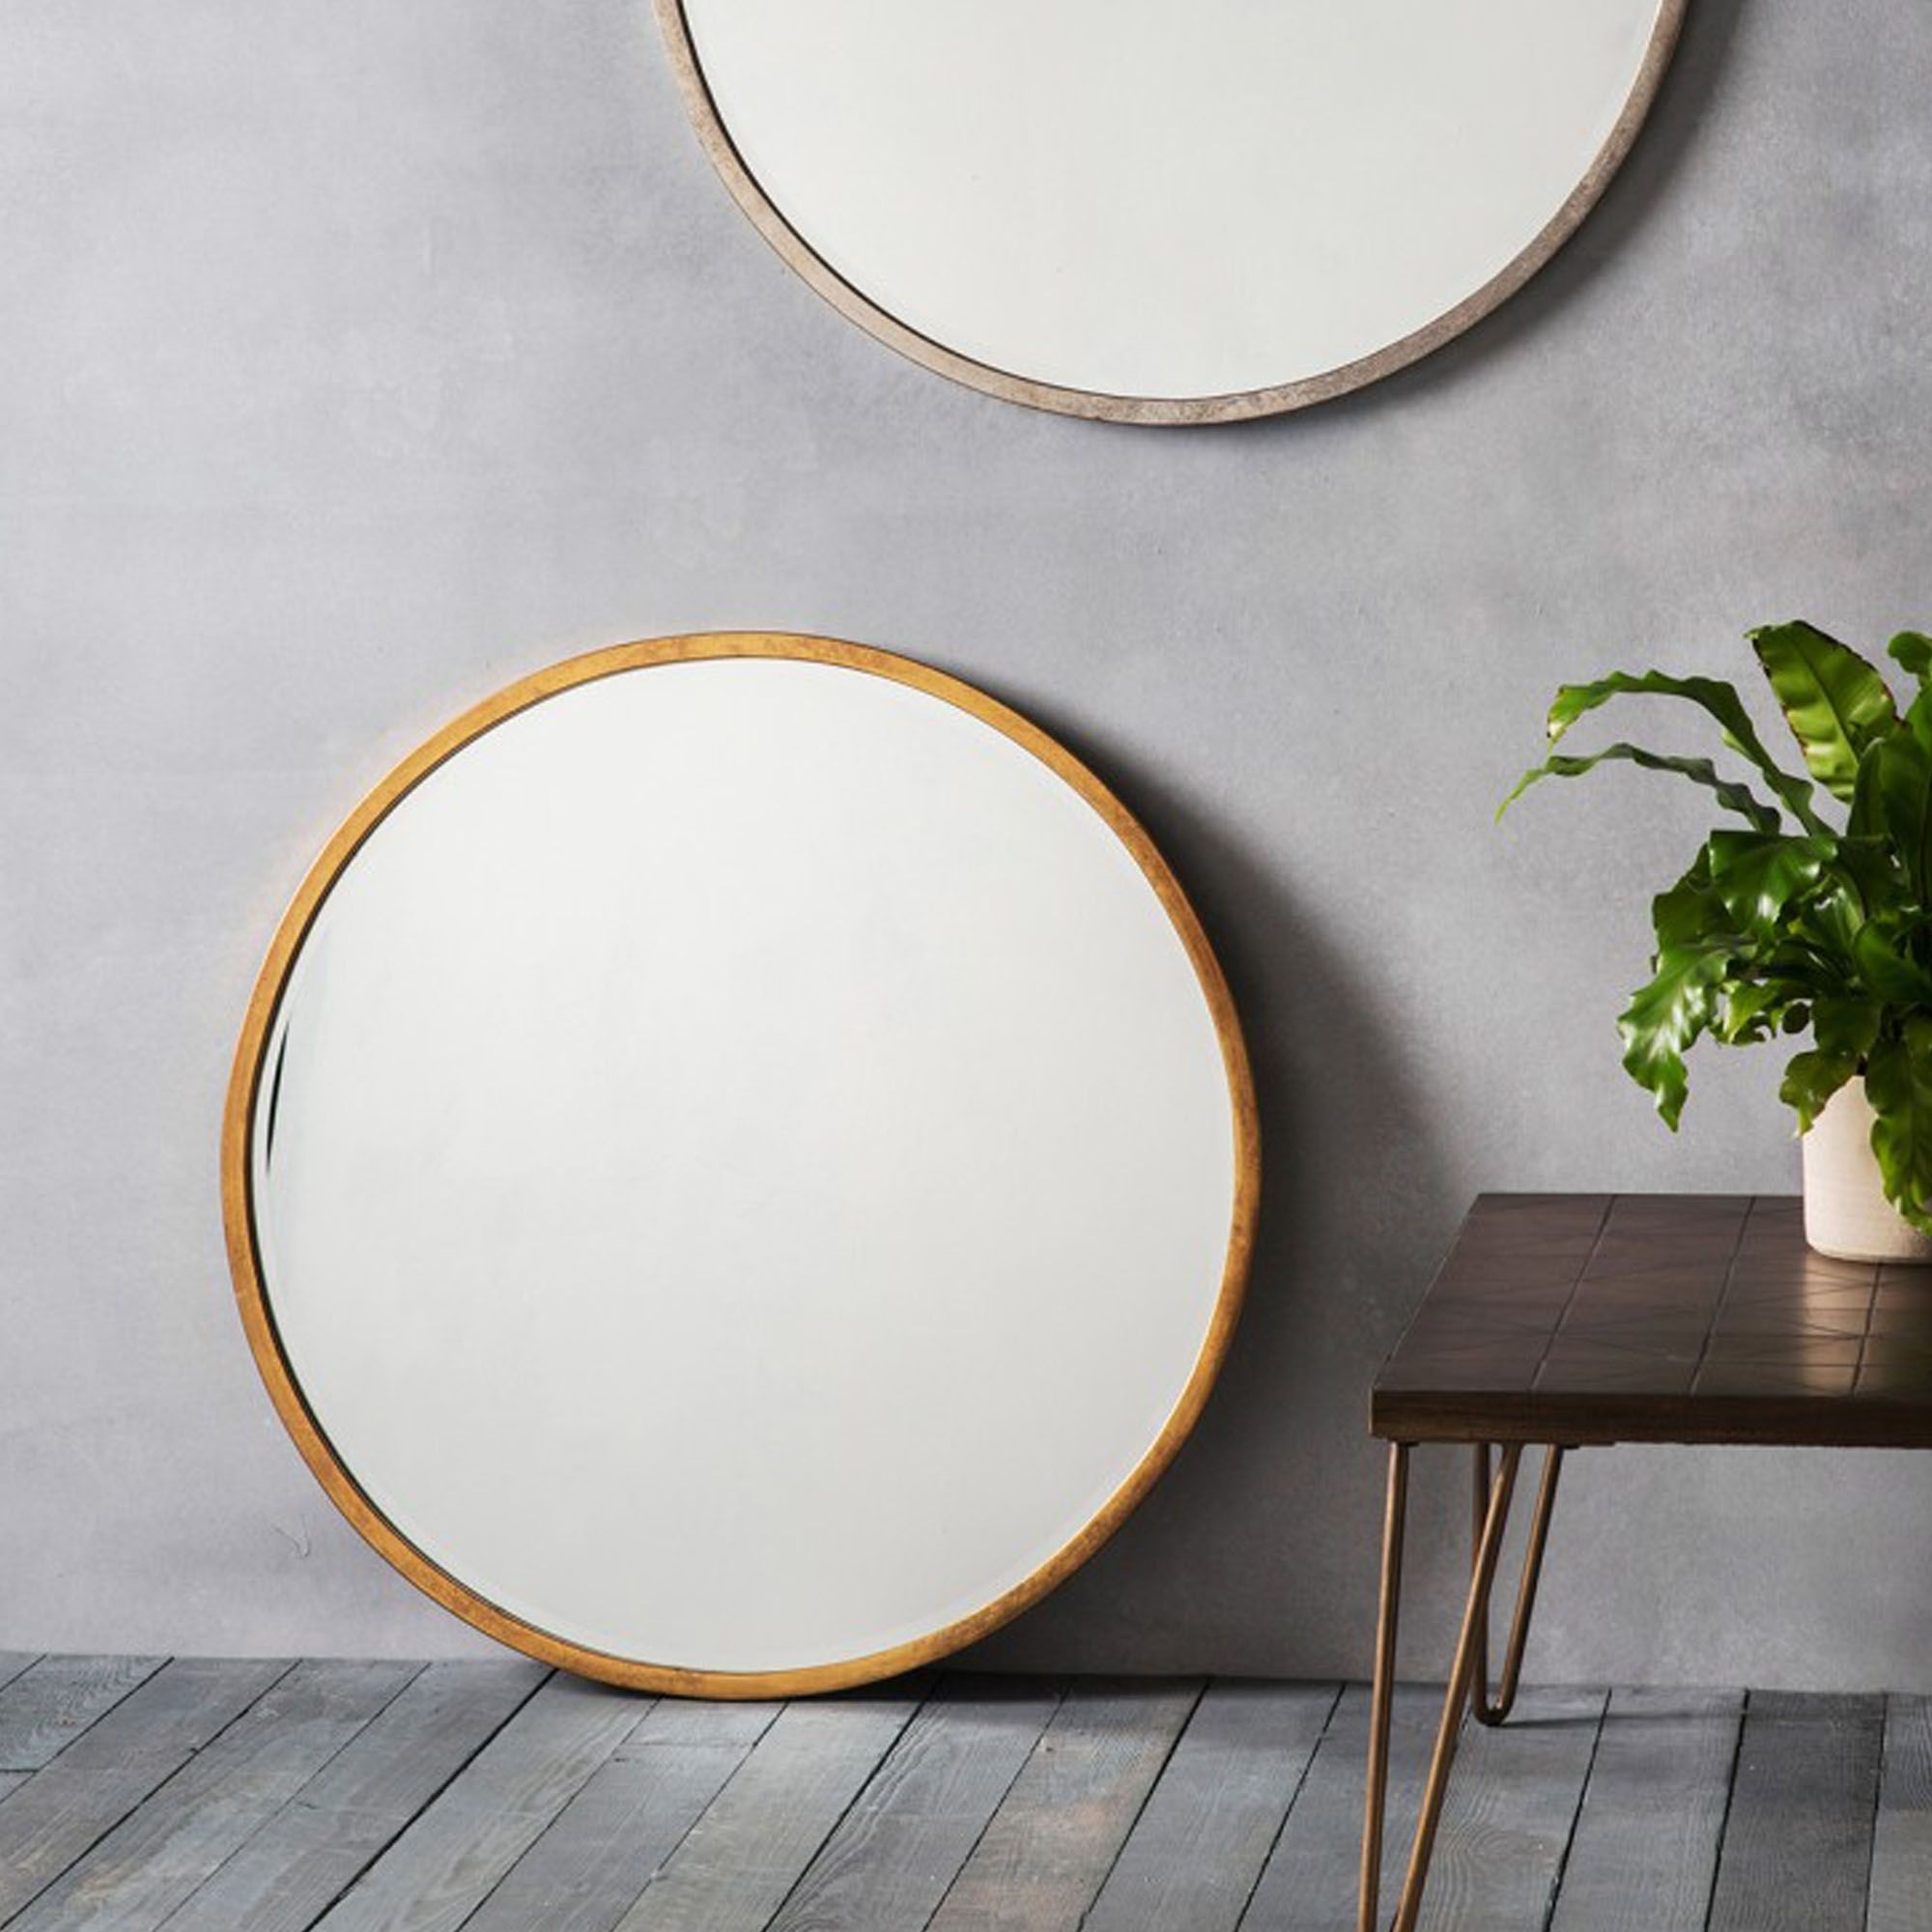 Higgins Antique Gold Round Wall Mirror | Wall Mirrors | Homesdirect365 For Antique Gold Leaf Round Oversized Wall Mirrors (View 7 of 15)